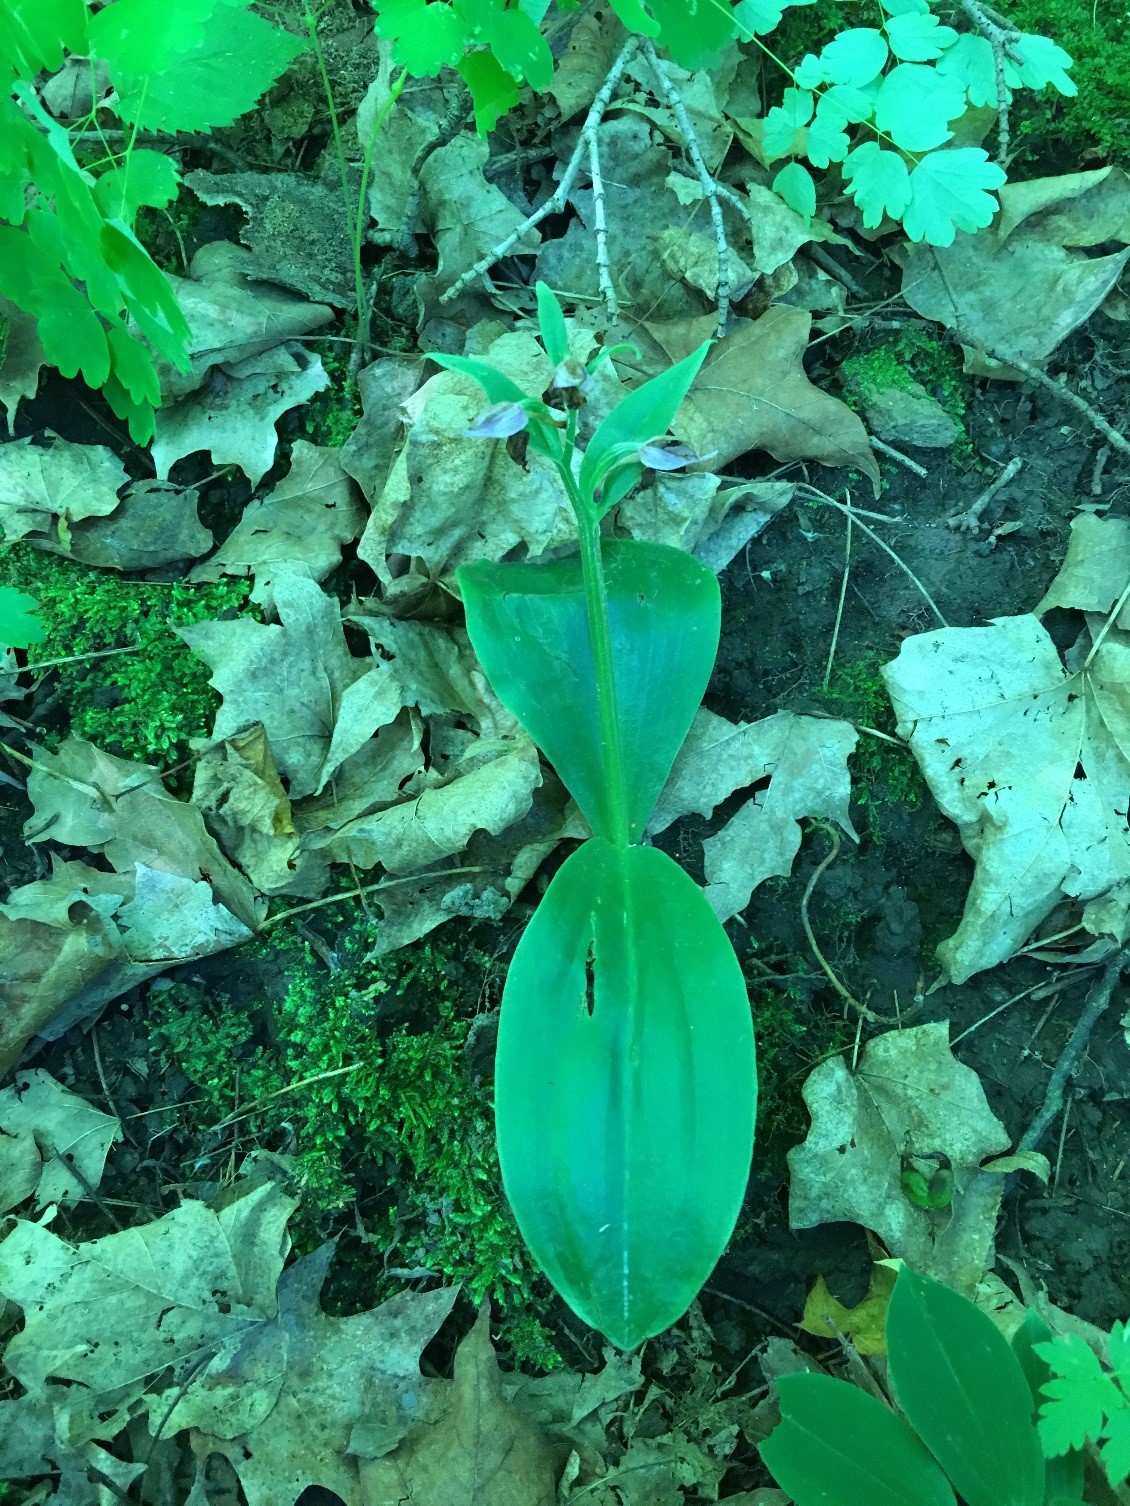 A few showy orchis (Galearis spectabilis) plants were present in the stand during a June visit; they were just nearing the end of their flowering season